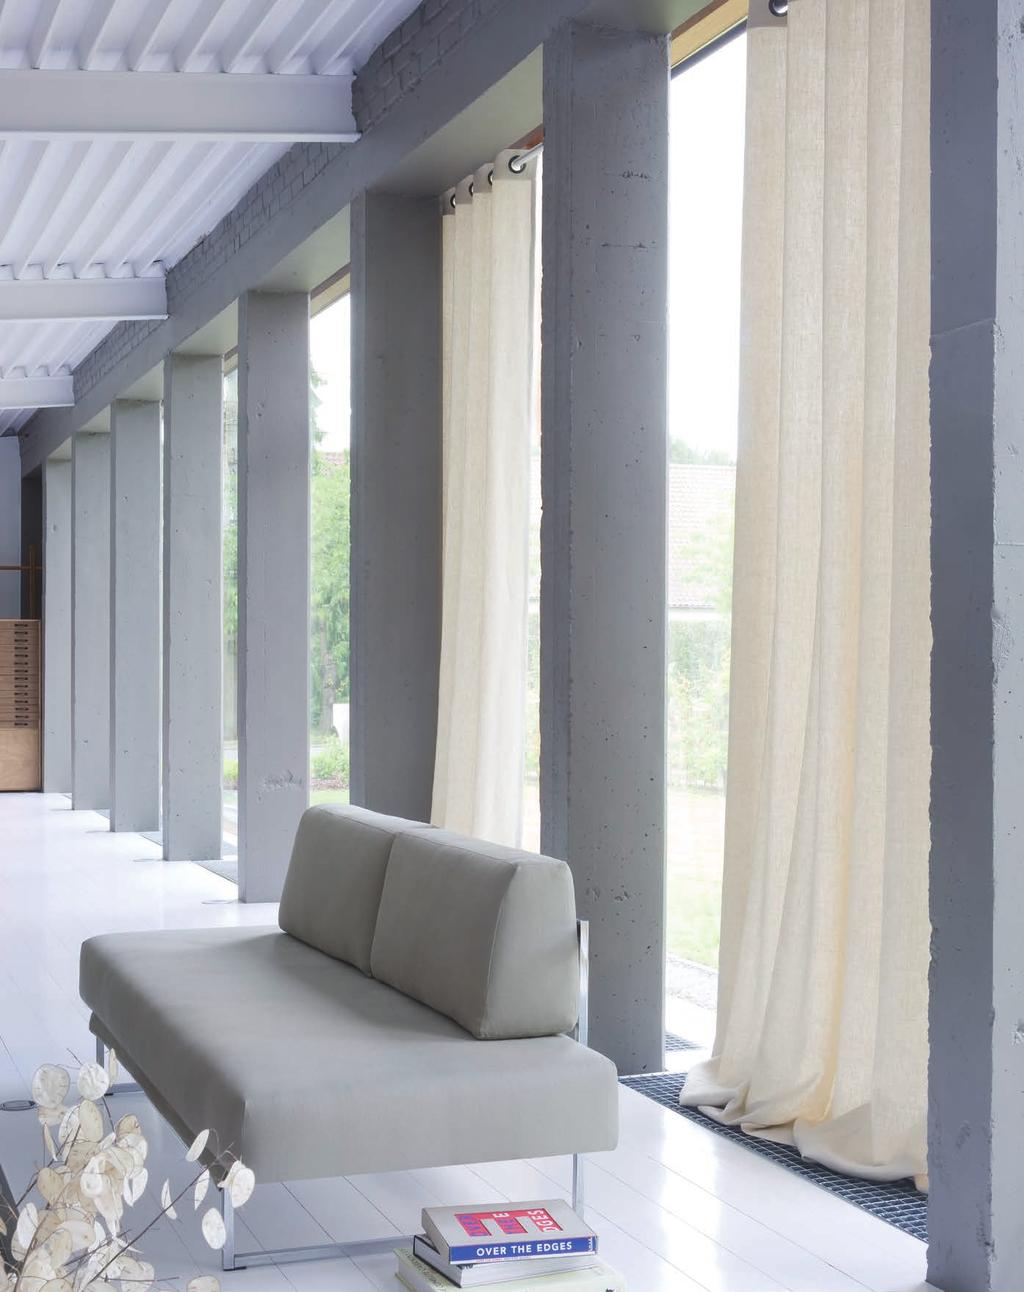 Innaloo Curtain and Blind Centre specialises in both residential and commercial project work.